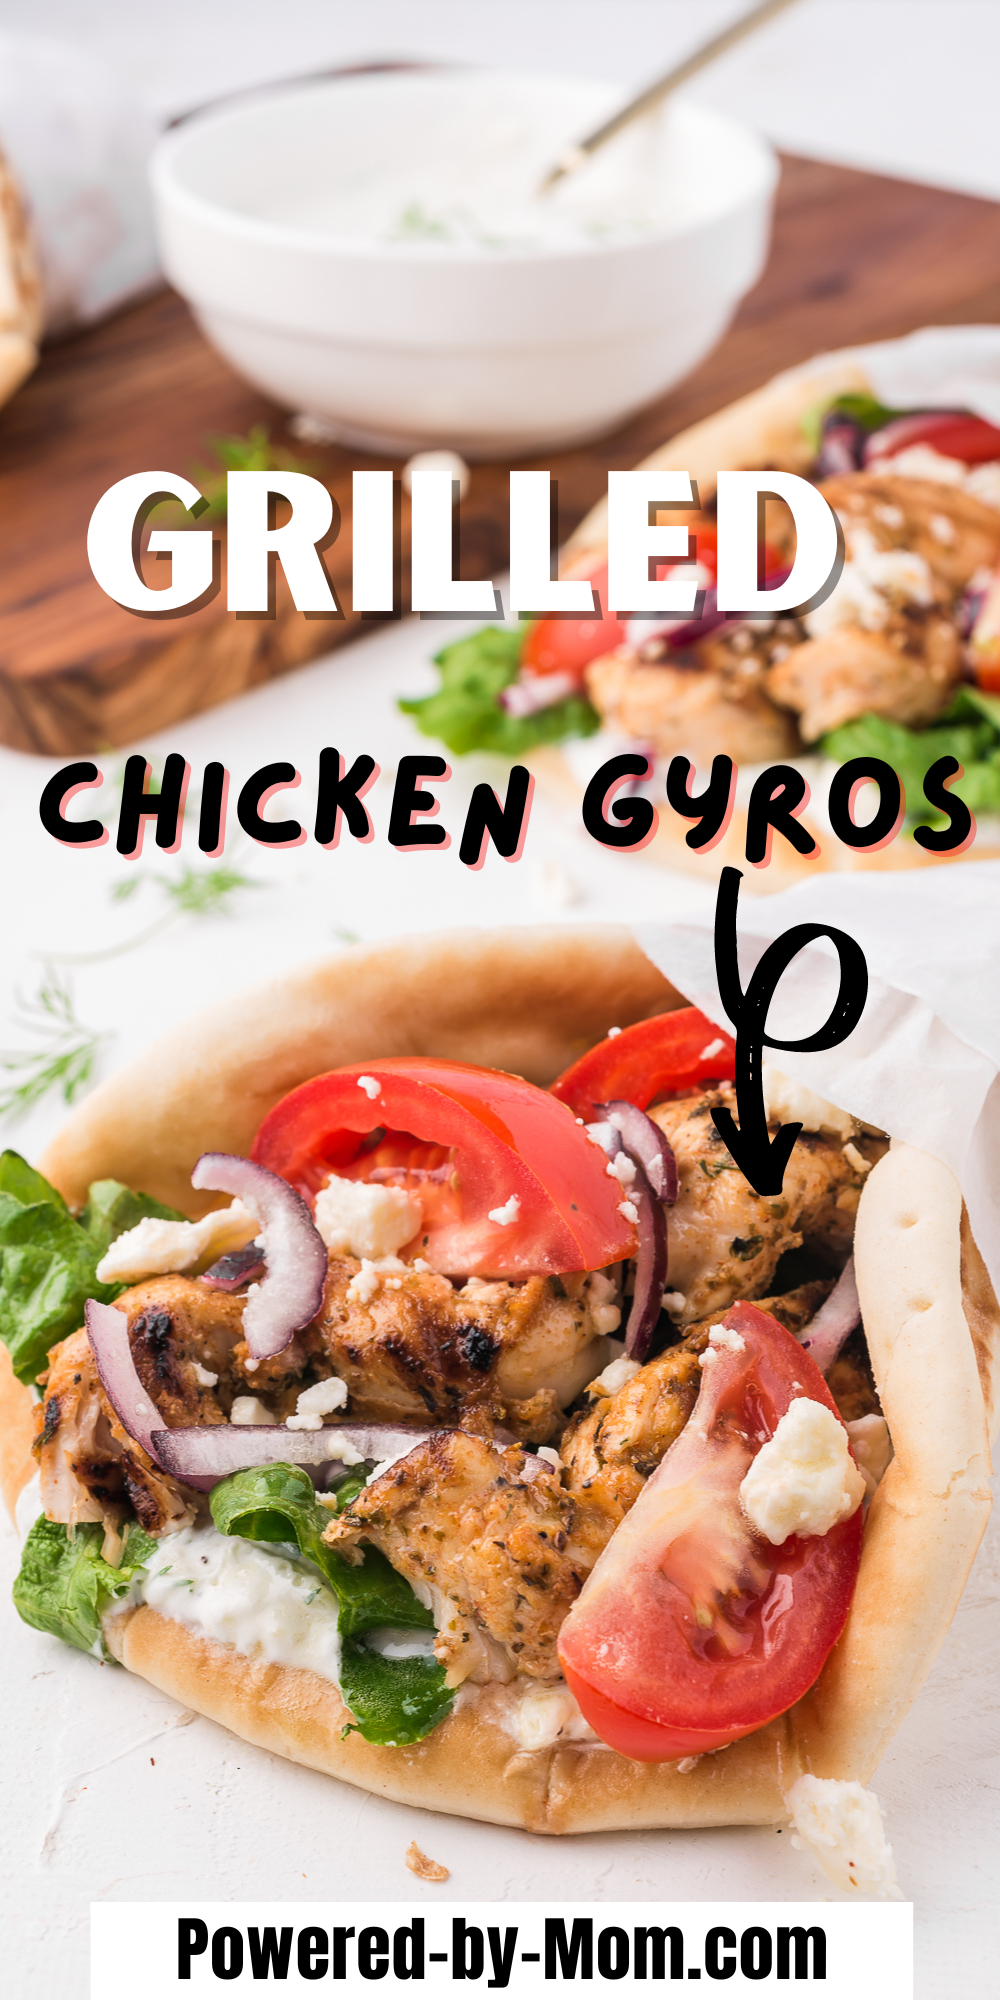 The marinade for this Greek Chicken Gyros recipe is so scrumptious and we use it even if we're not making gyros. This popular Greek fast-food dish consisting of grilled chicken that has been marinated in a blend of herbs and spices.